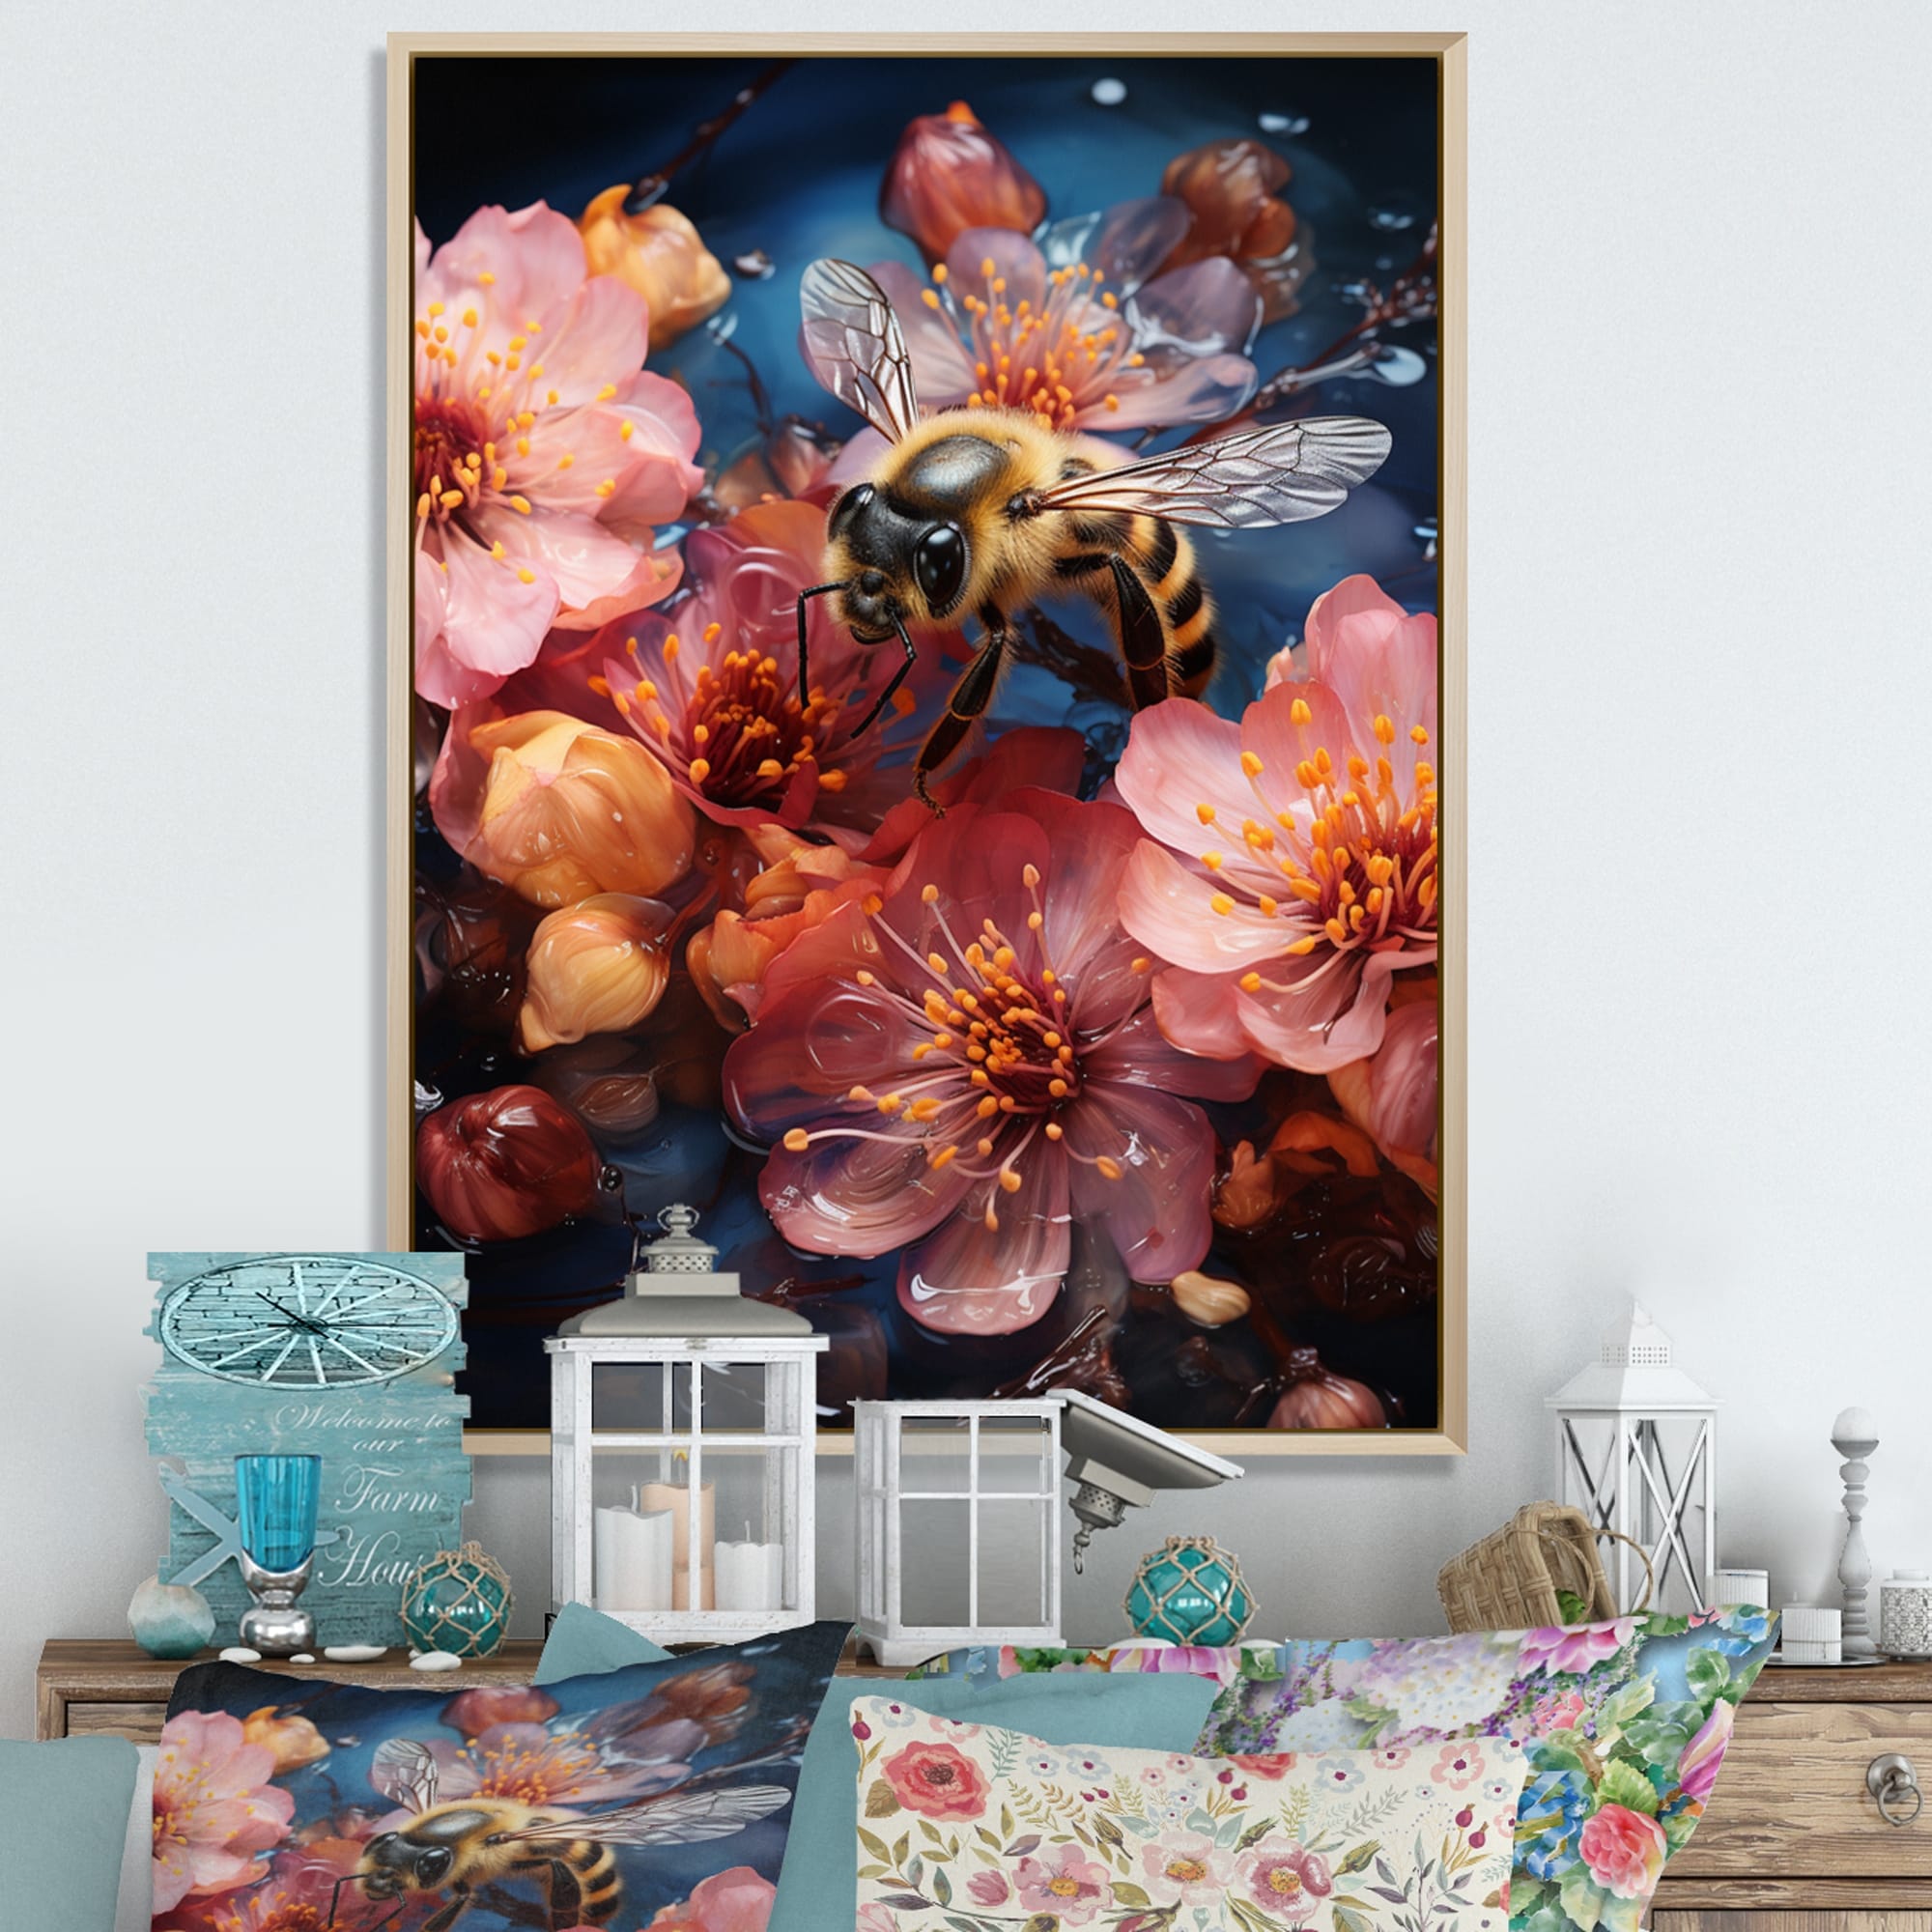 https://ak1.ostkcdn.com/images/products/is/images/direct/86d75c091aba2ee1e3971fef05999cd9384a6047/Designart-%22Colorful-Bee-V%22-Animals-Bee-Framed-Wall-Decor.jpg